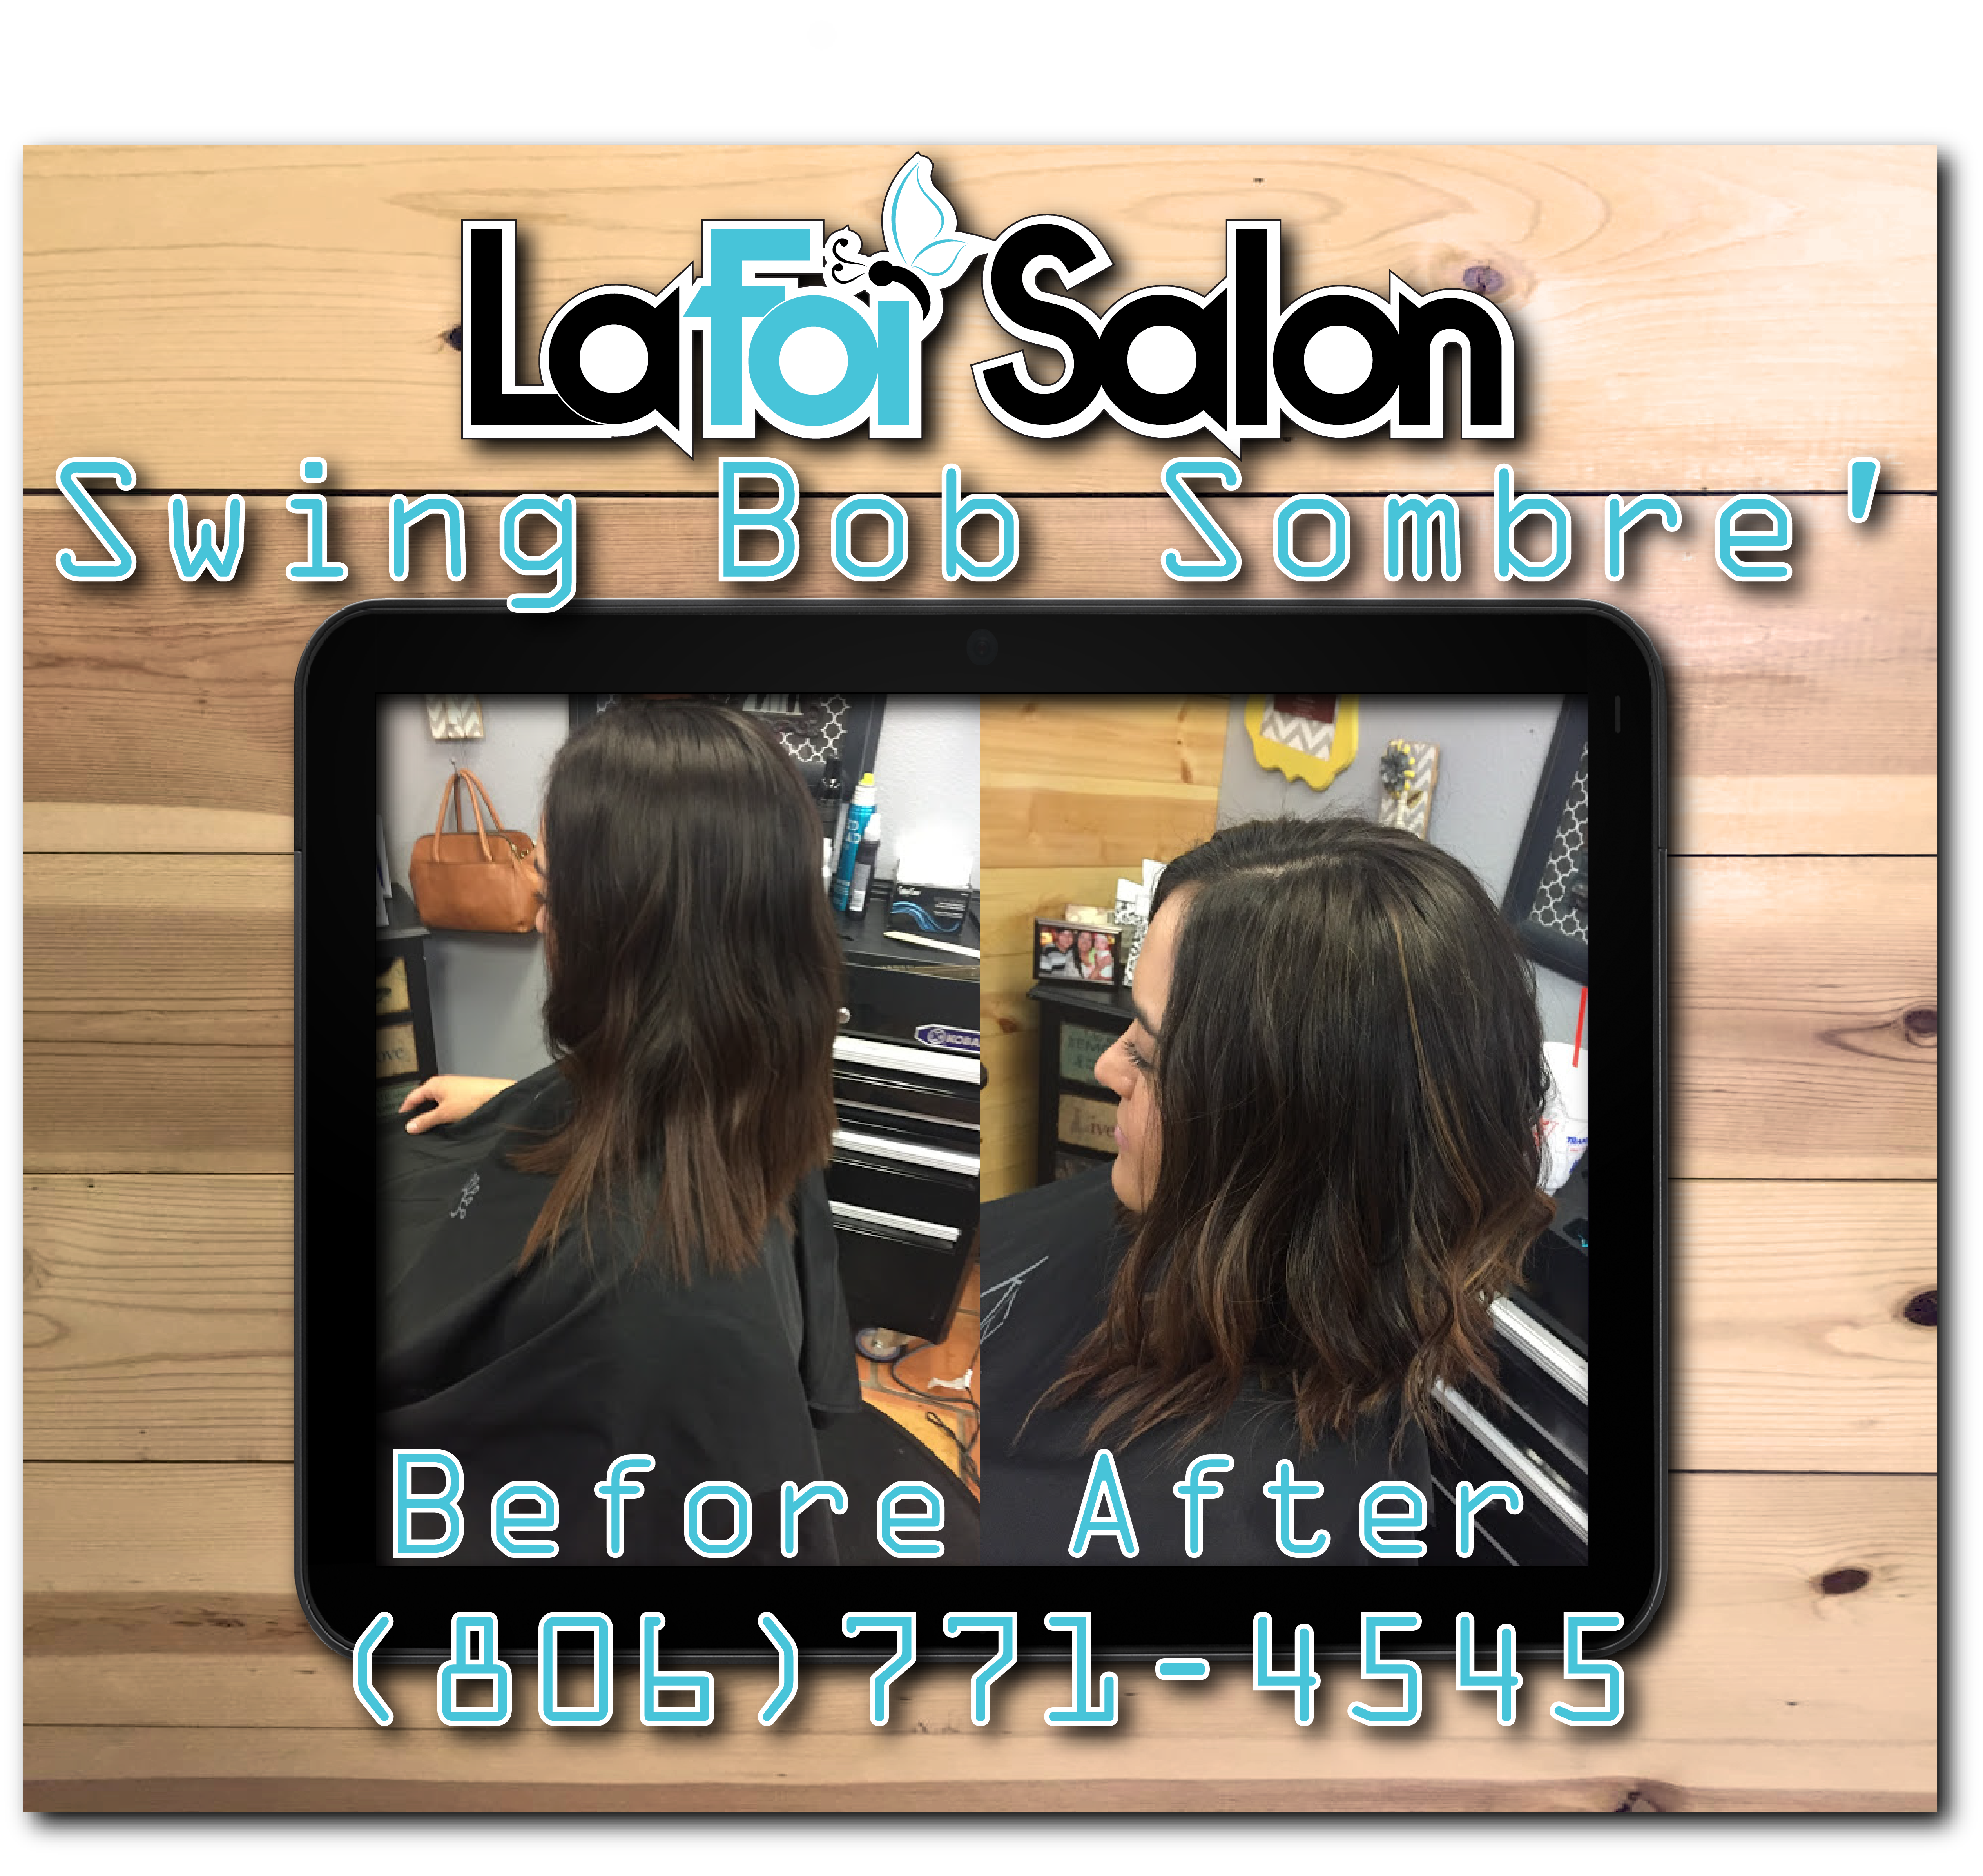 Check Out This Beautiful Swing Bob Sombre& 39;!!! Now Say That 5 Times Fast!!! (806) 771-4545 www.lafoisalon.com